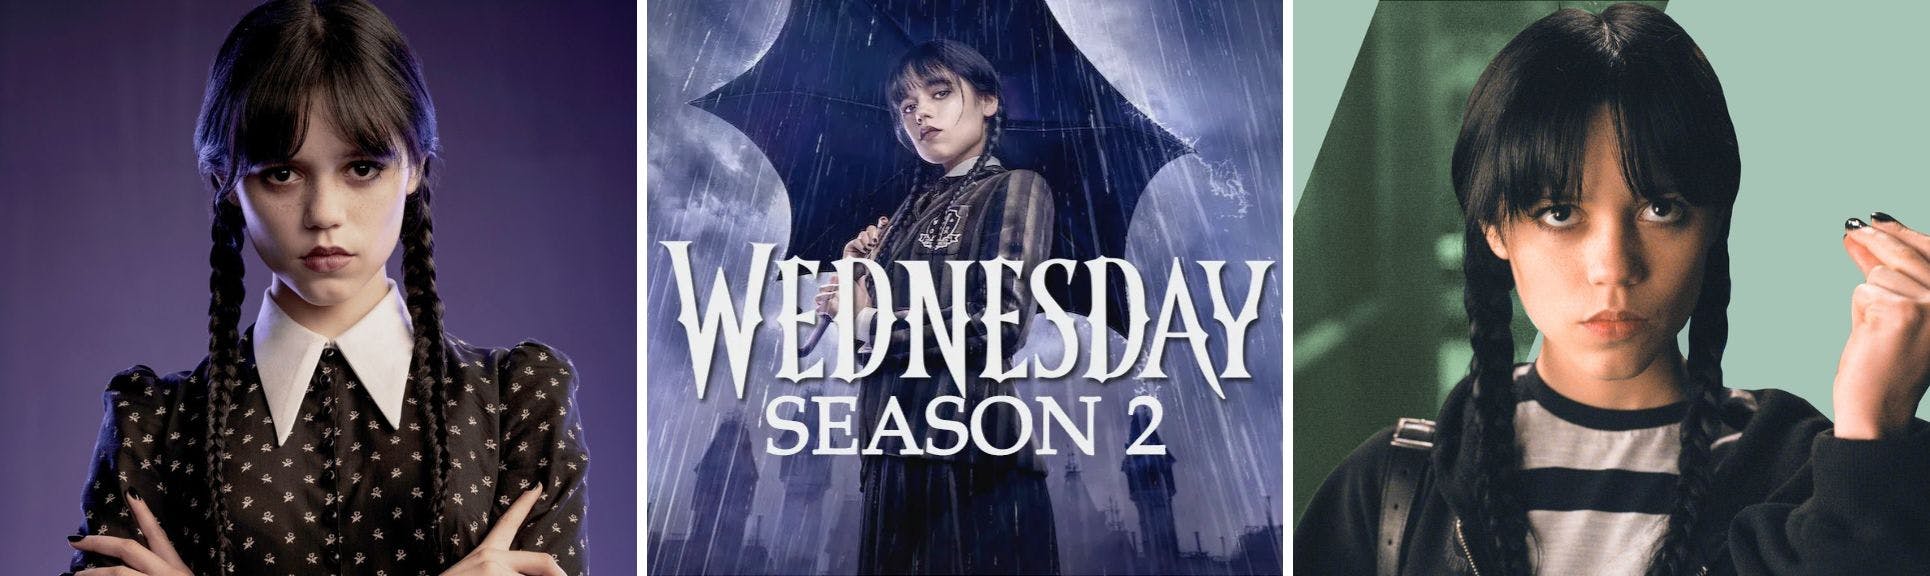 Cover Image for Here’s Everything You Need To Know About Wednesday Season 2